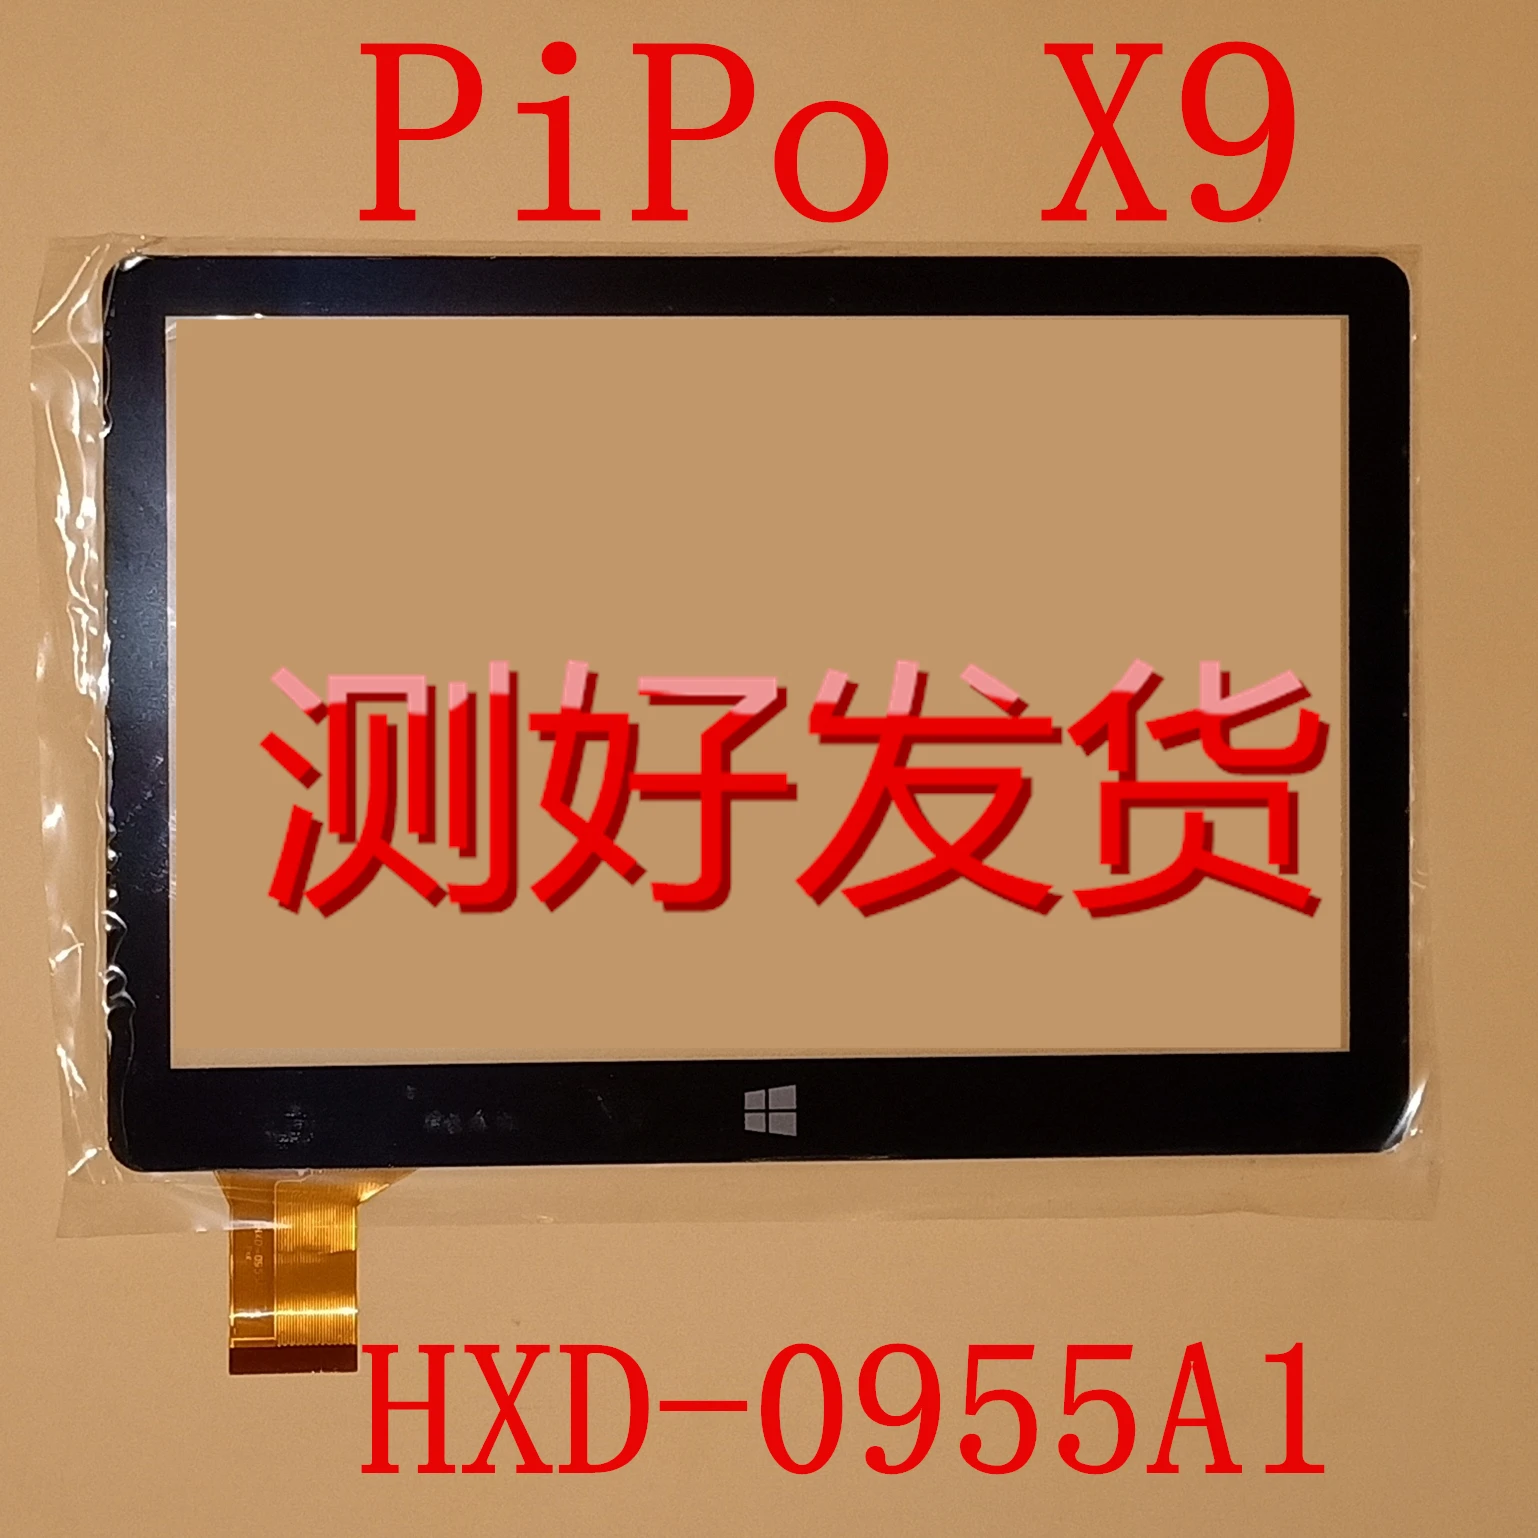 3PCS HXD-0955A1 9 inch For PIPO X9 Box SEC-EZ9Z tablet pc touch screen panel digitizer glass sensor replacement